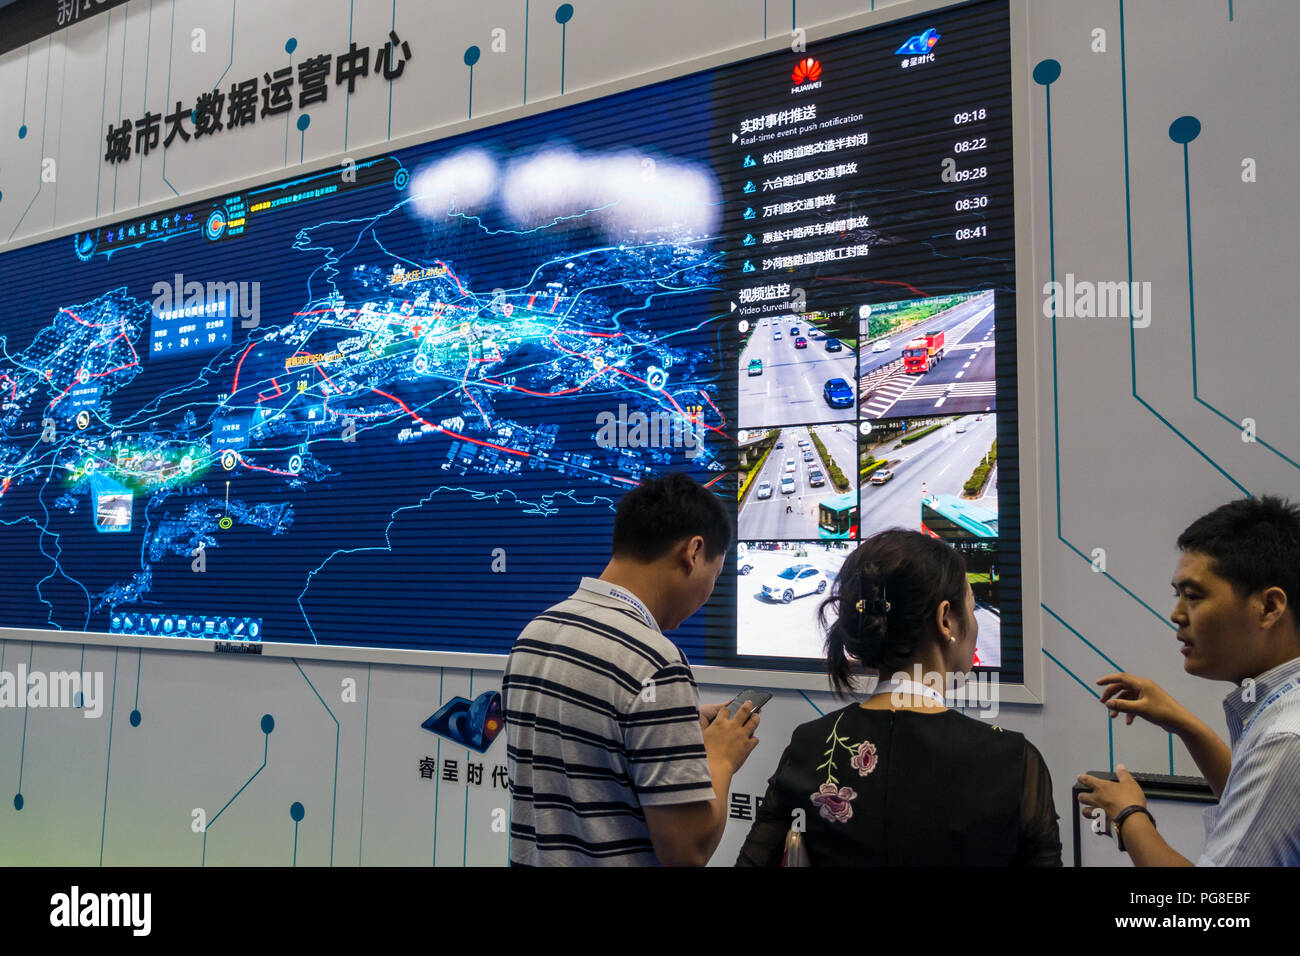 Sales pitch of smart city technology equipment at Smart City Expo in Shenzhen, China. Stock Photo